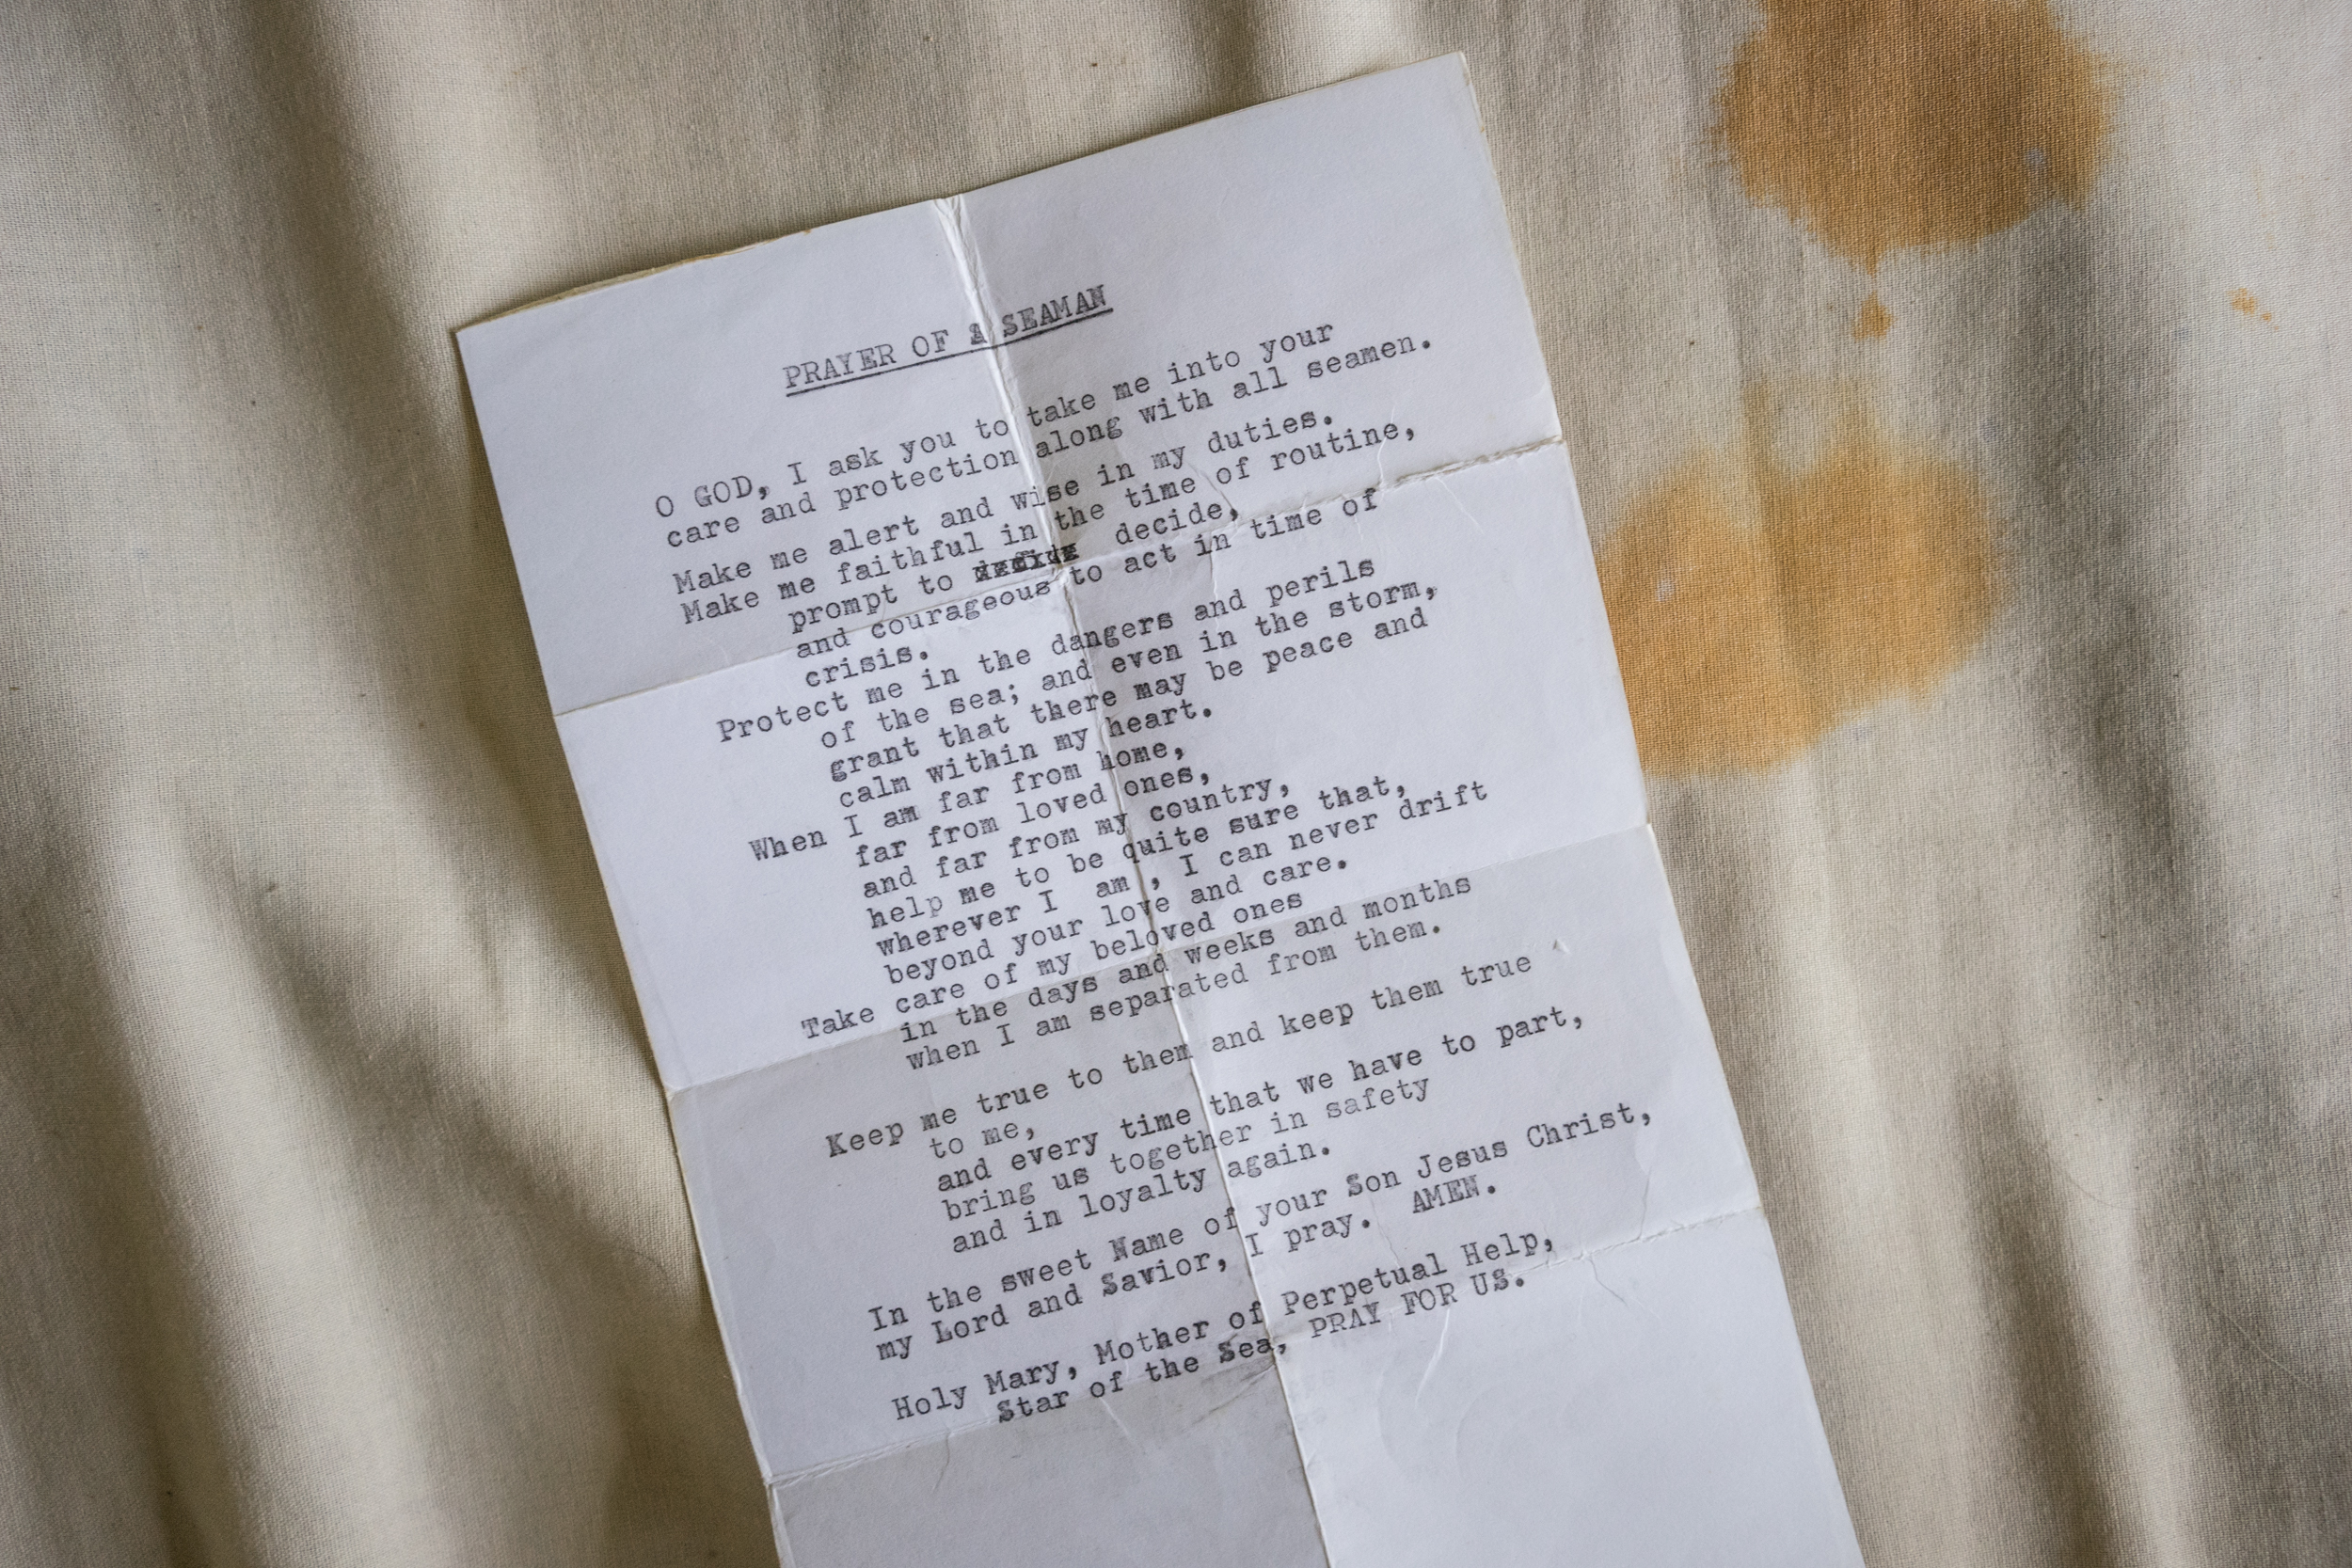  Kalibo, Philippines - September 20, 2015: A slip of paper with a typewritten prayer for seafarers is seen in the home of Reden Remorate. Remorate is one of the victims of a Singapore based  maritime manning agency whose recruits are vulnerable to ab